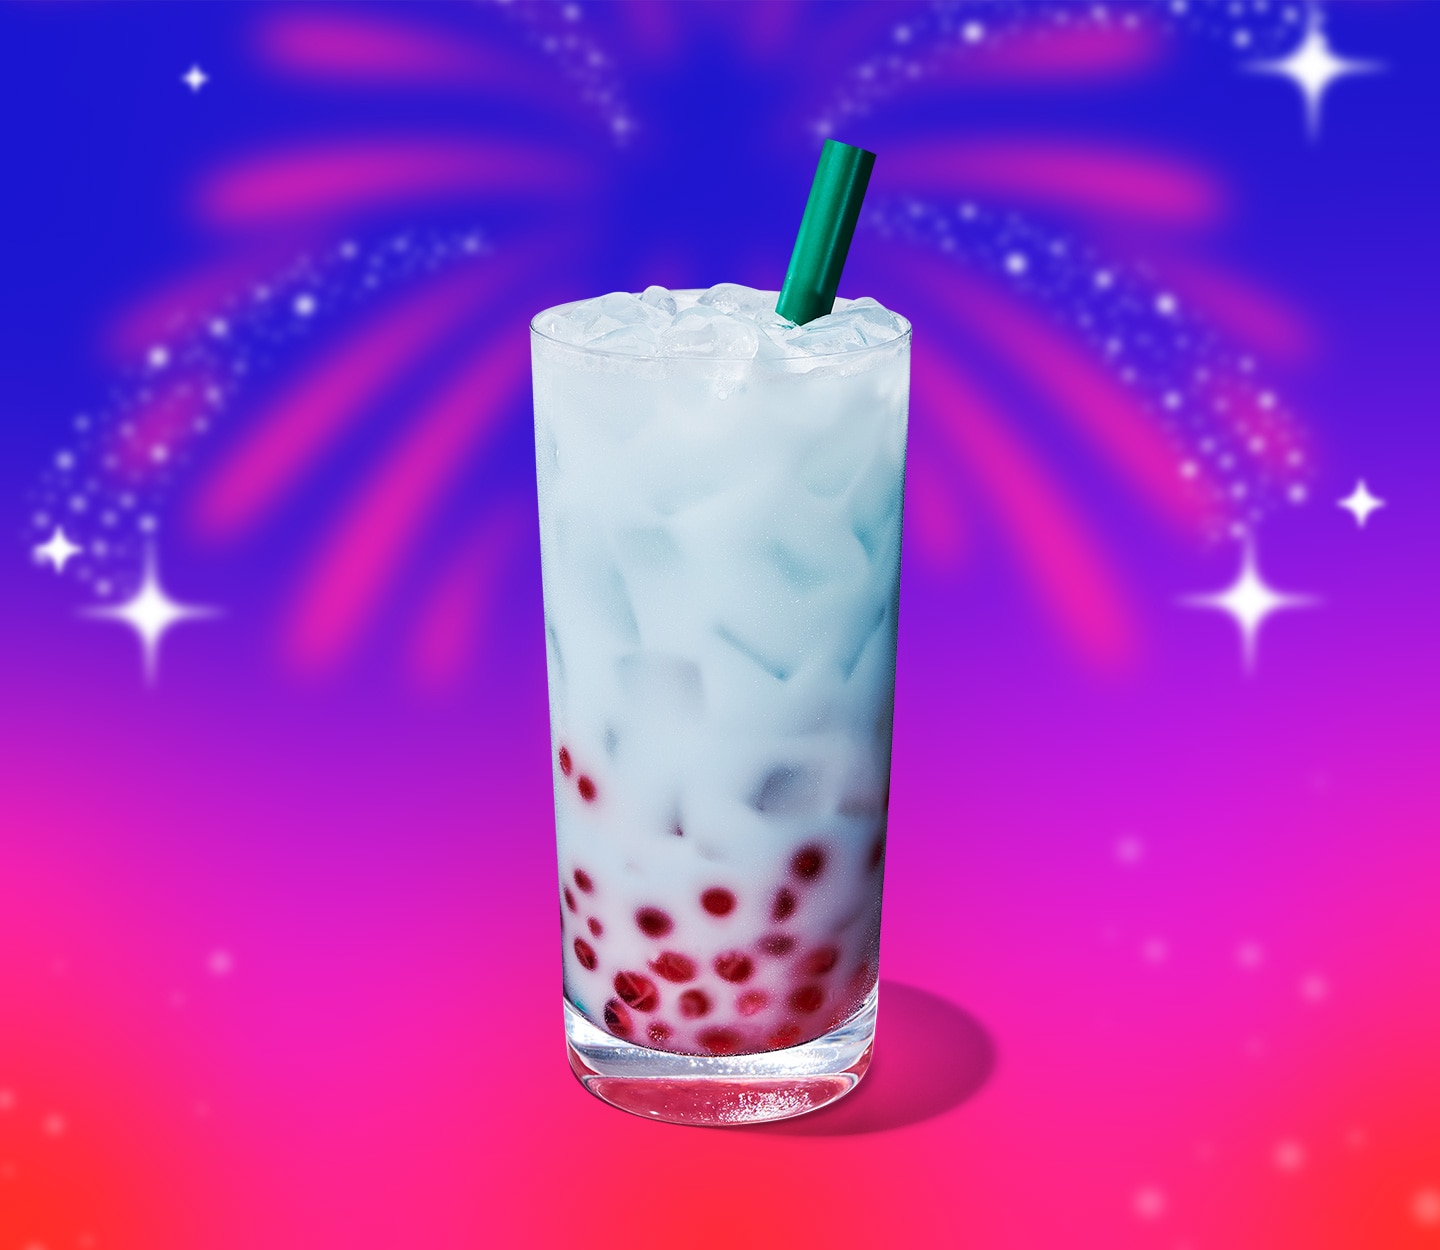 An iced, light blue drink with pink pearls at the bottom of the glass, and fireworks in the background.